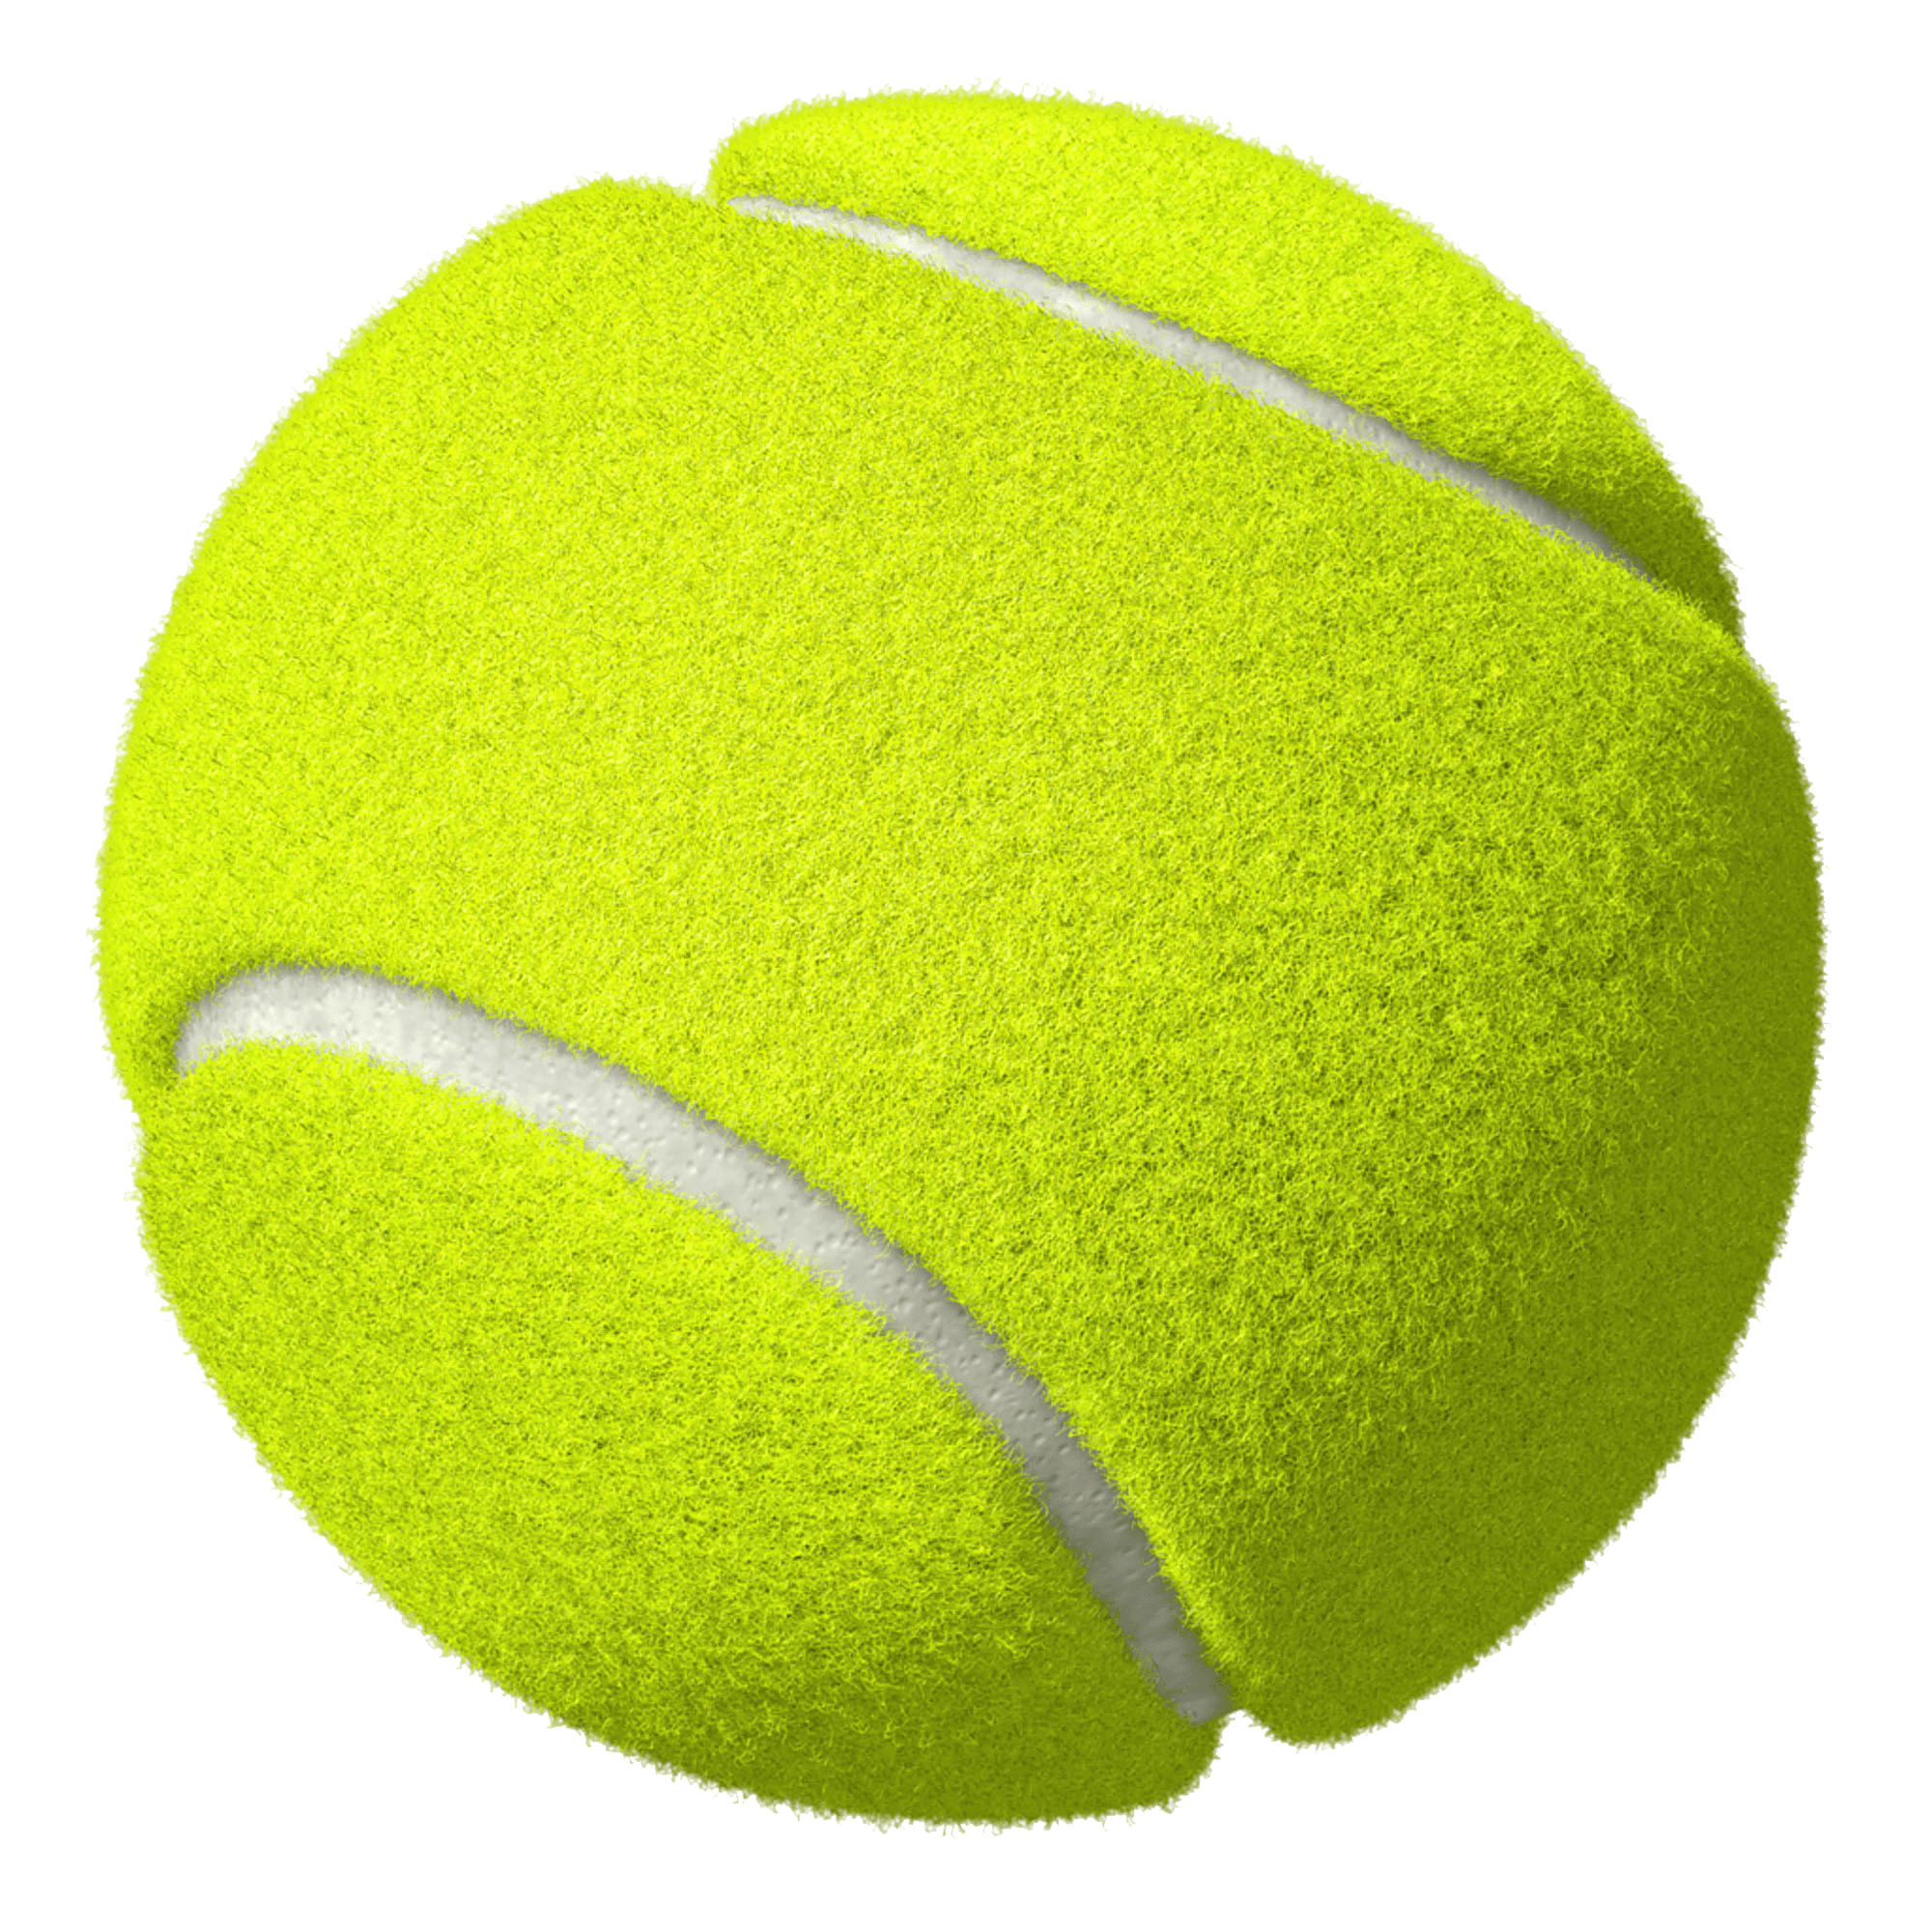 Tennis Ball PNG HD and HQ Image pngteam.com